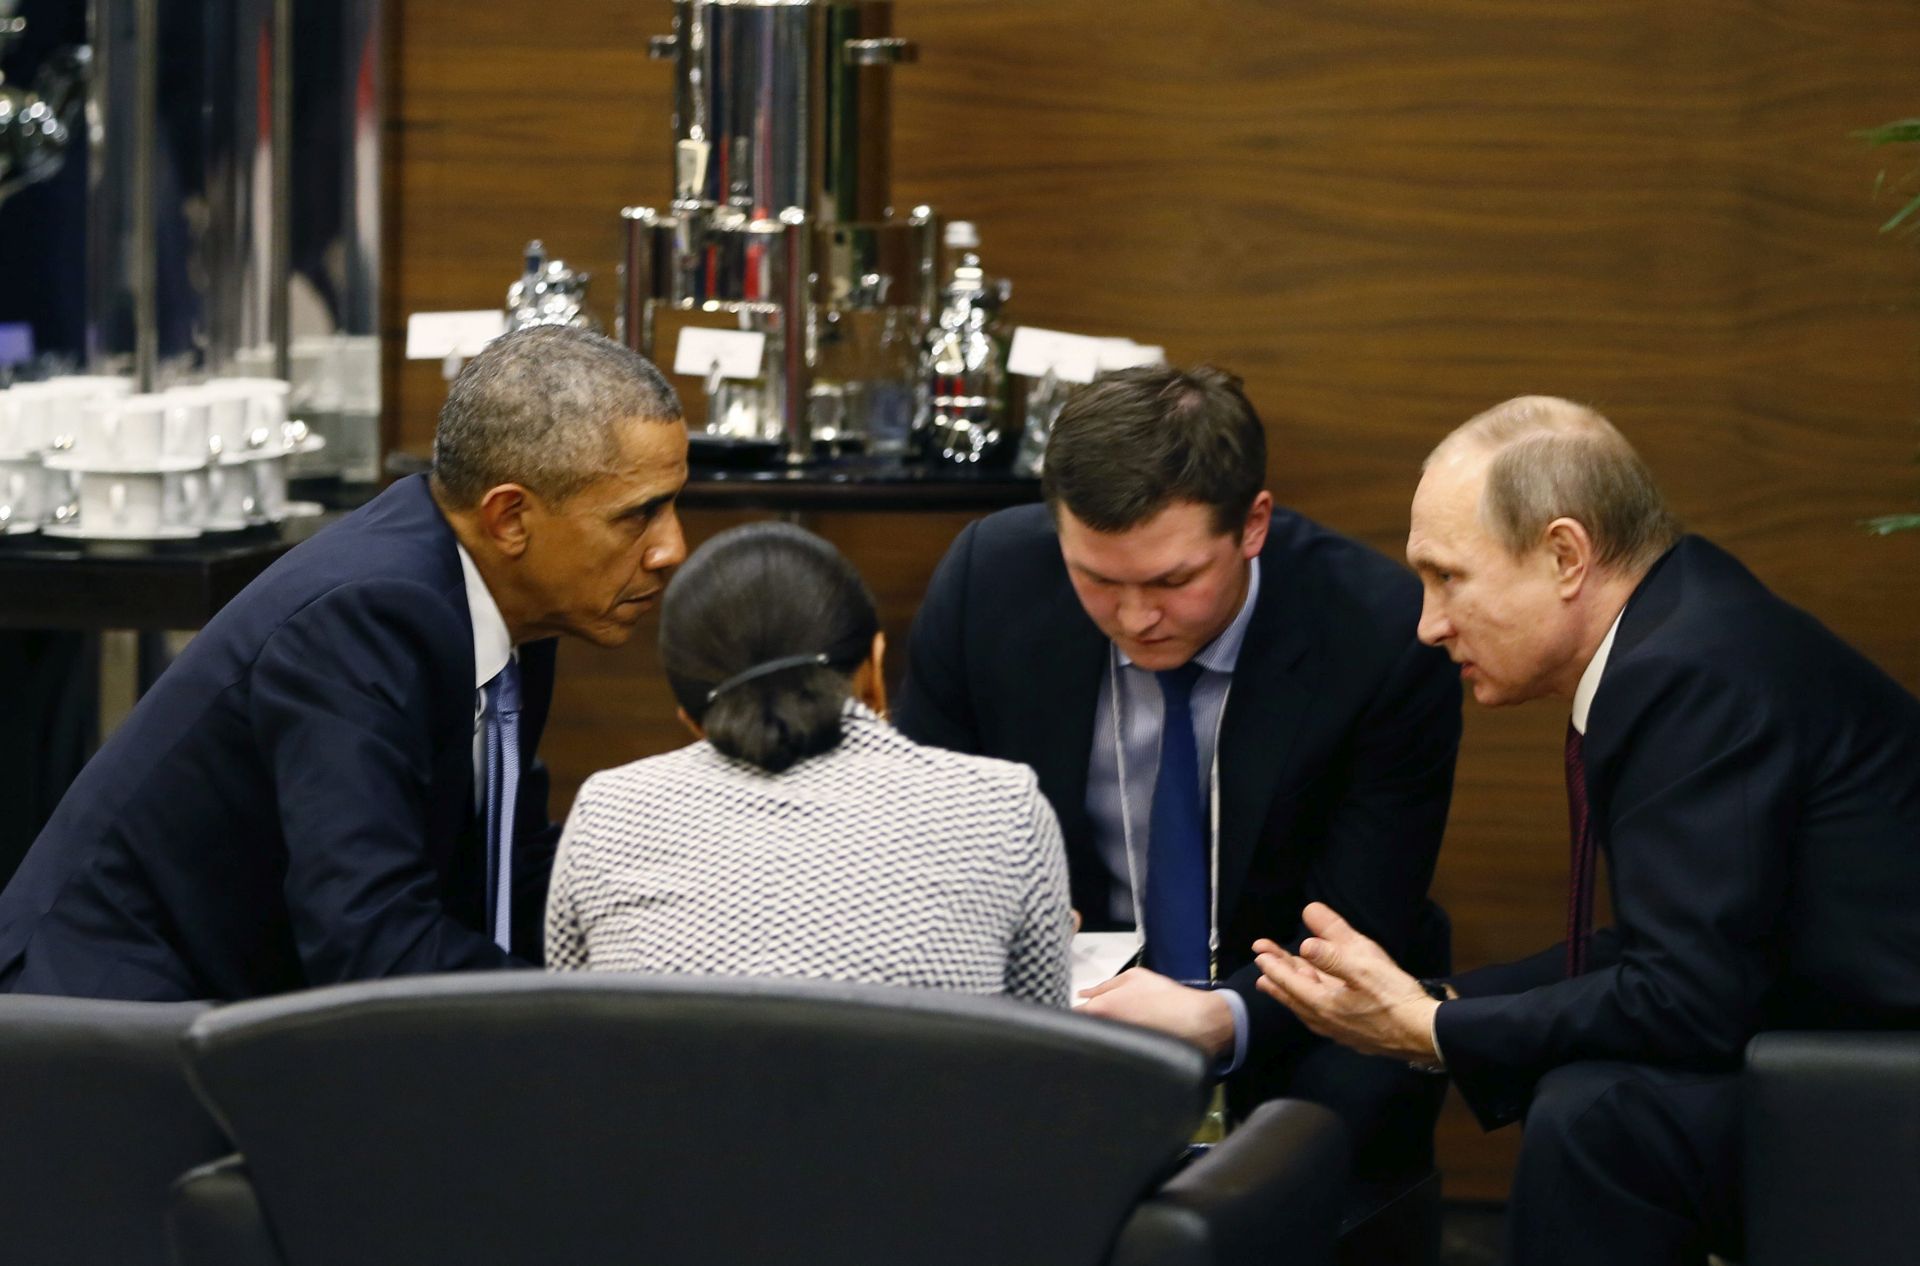 epa05026988 US President Barack Obama (L) talks to Russian counterpart Vladimir Putin (R) during a break of the G20 summit working session in Antalya, Turkey, 15 November 2015. In additional to discussions on the global economy, the G20 grouping of leading nations is set to focus on Syria during its summit this weekend, including the refugee crisis and the threat of terrorism.  EPA/CEM OKSUZ/POOL